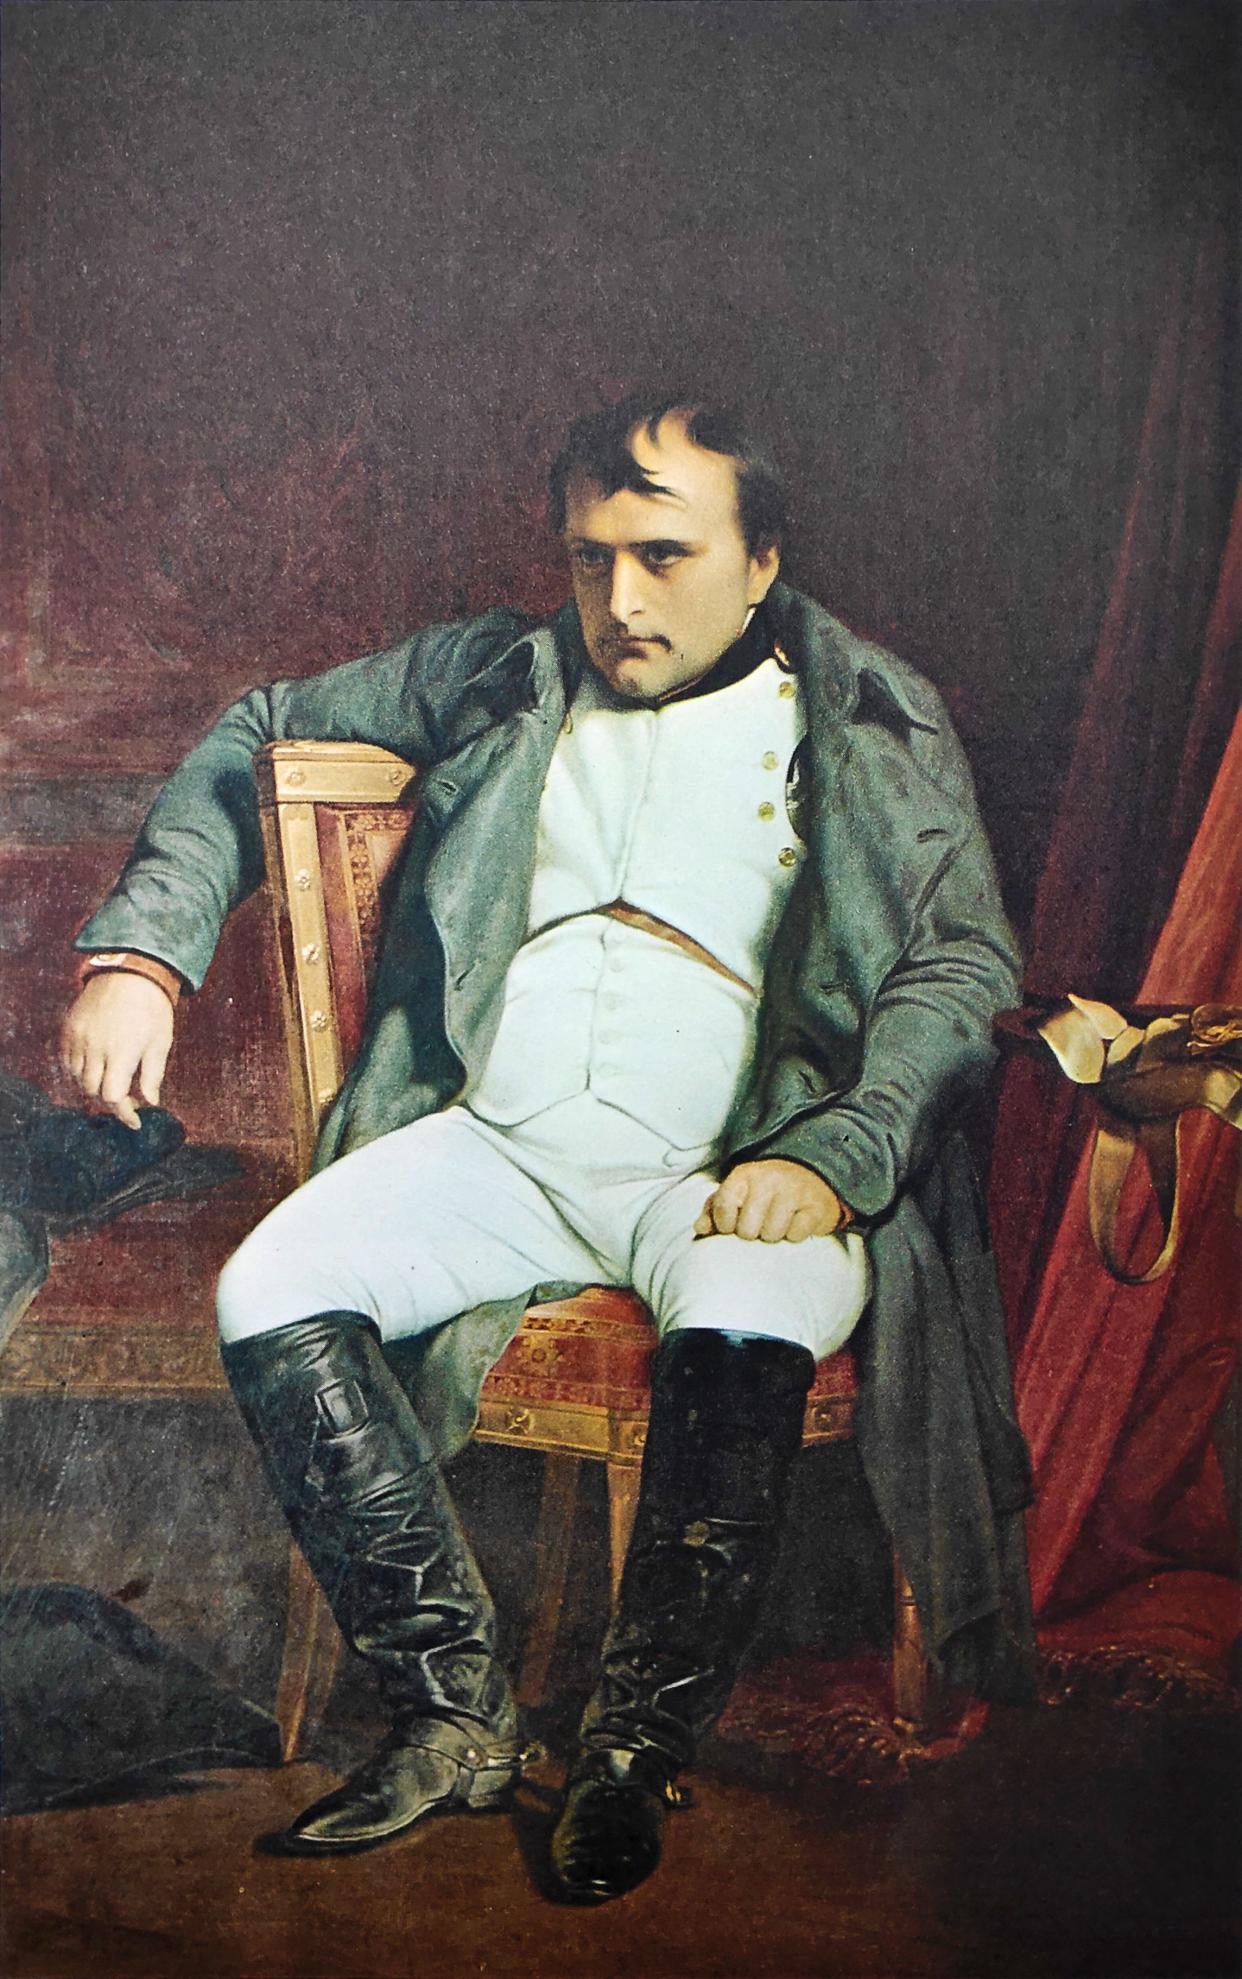 Portrait of Napoleon I after his farewell to Fontainebleau by Paul Delaroche painted in 1840. It was printed in the encyclopaedia